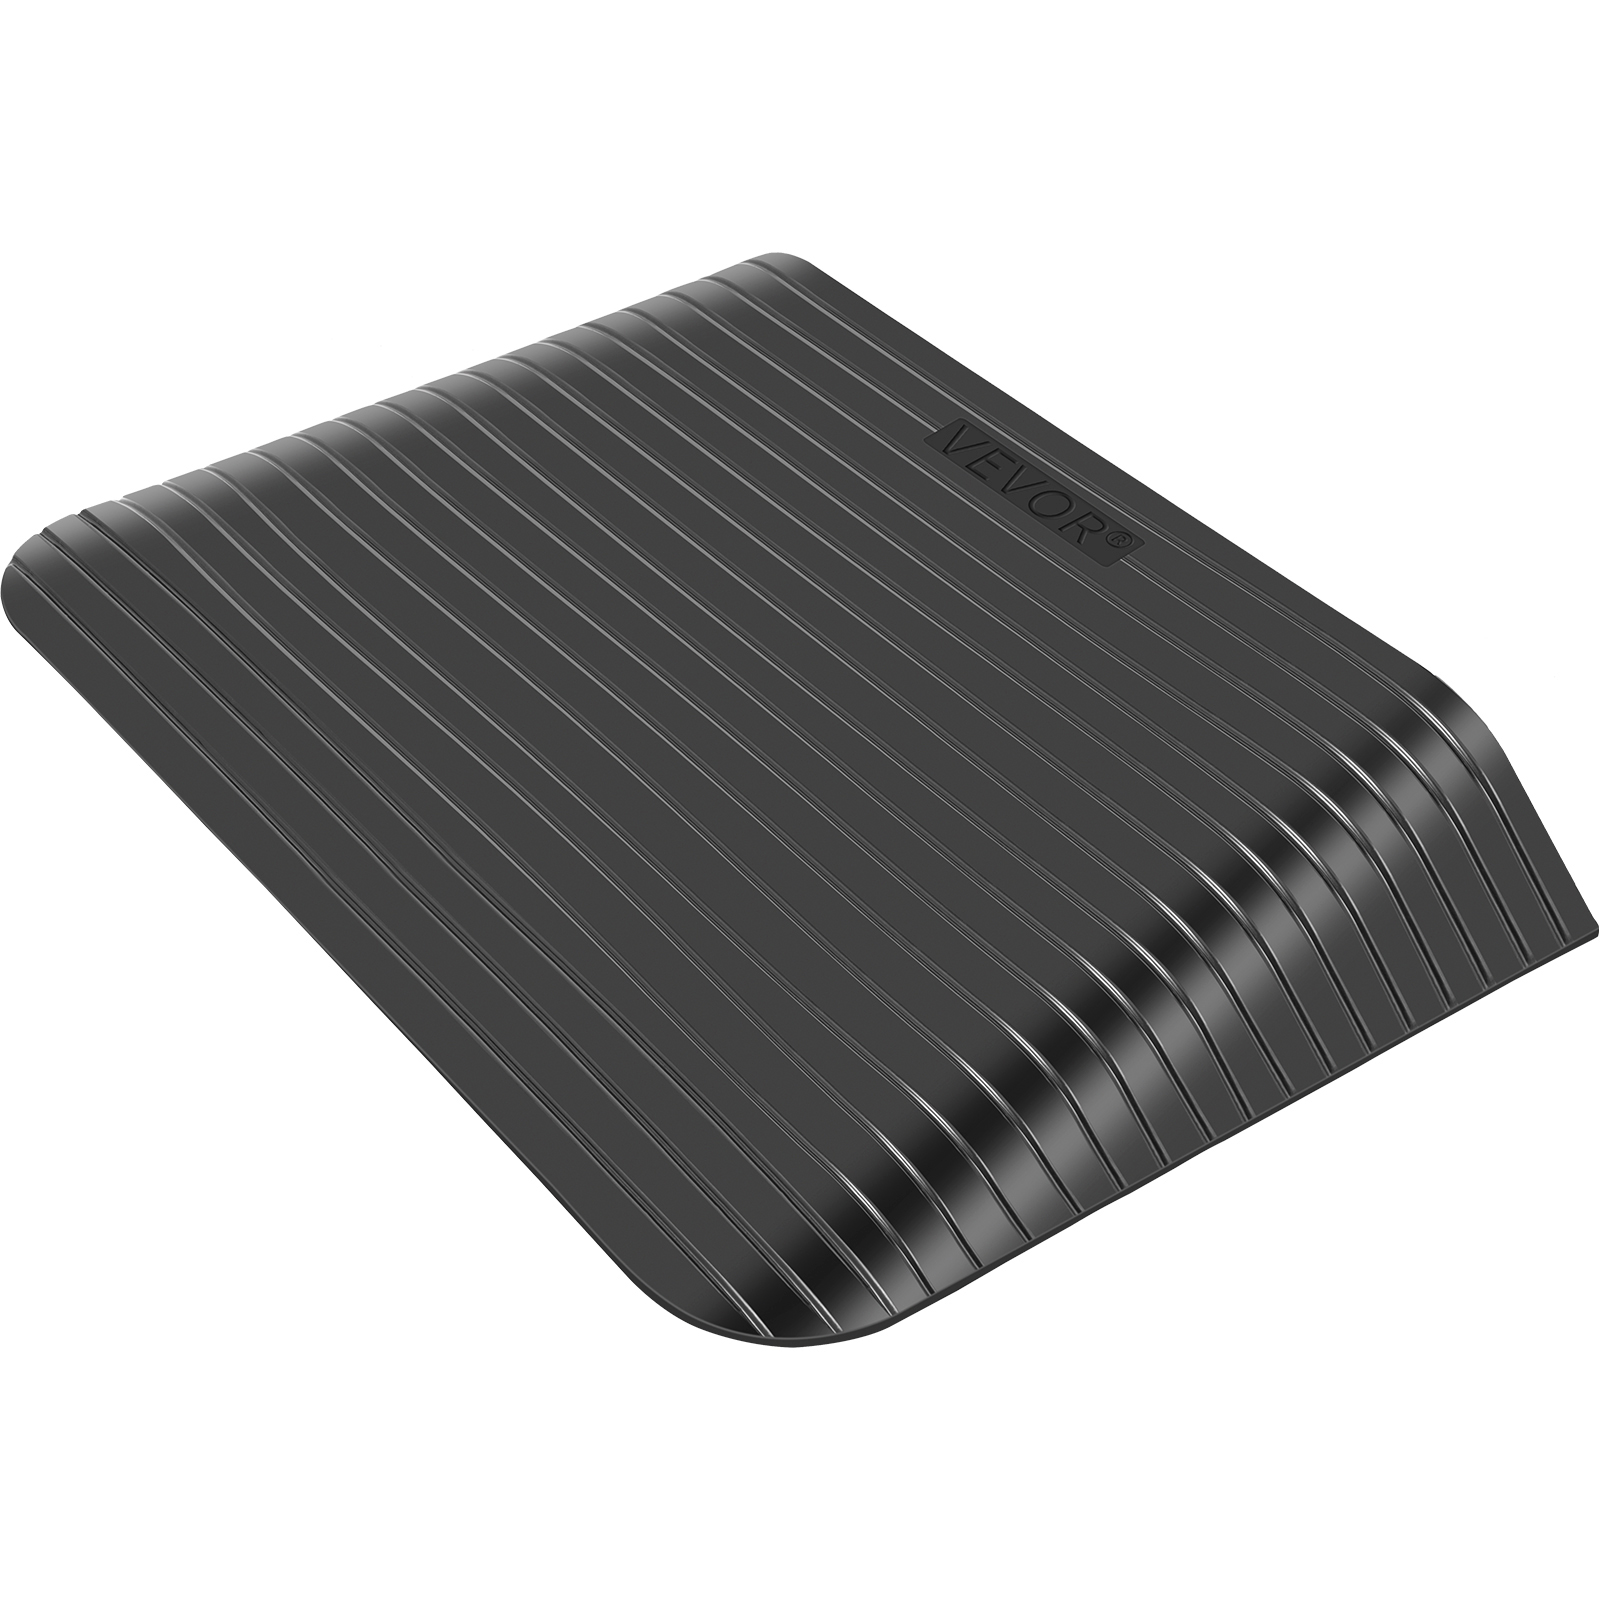 Rubber Threshold Ramp,3in Rise,3 Channels